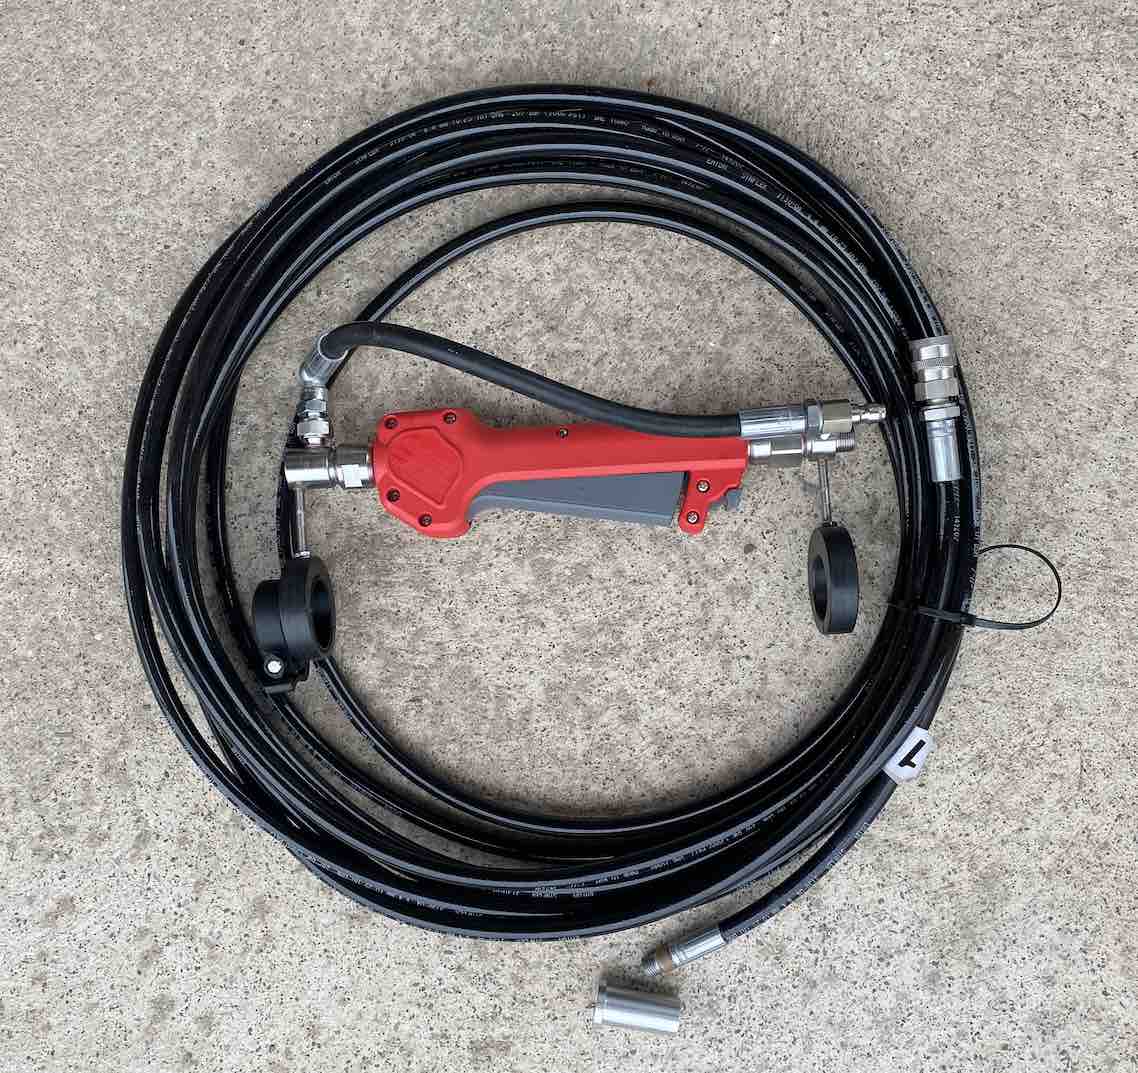 BENZ HP-4000 WFP PRESSURE WASHING CONVERSION KIT: Enables water fed poles to be used for pressure/power washing